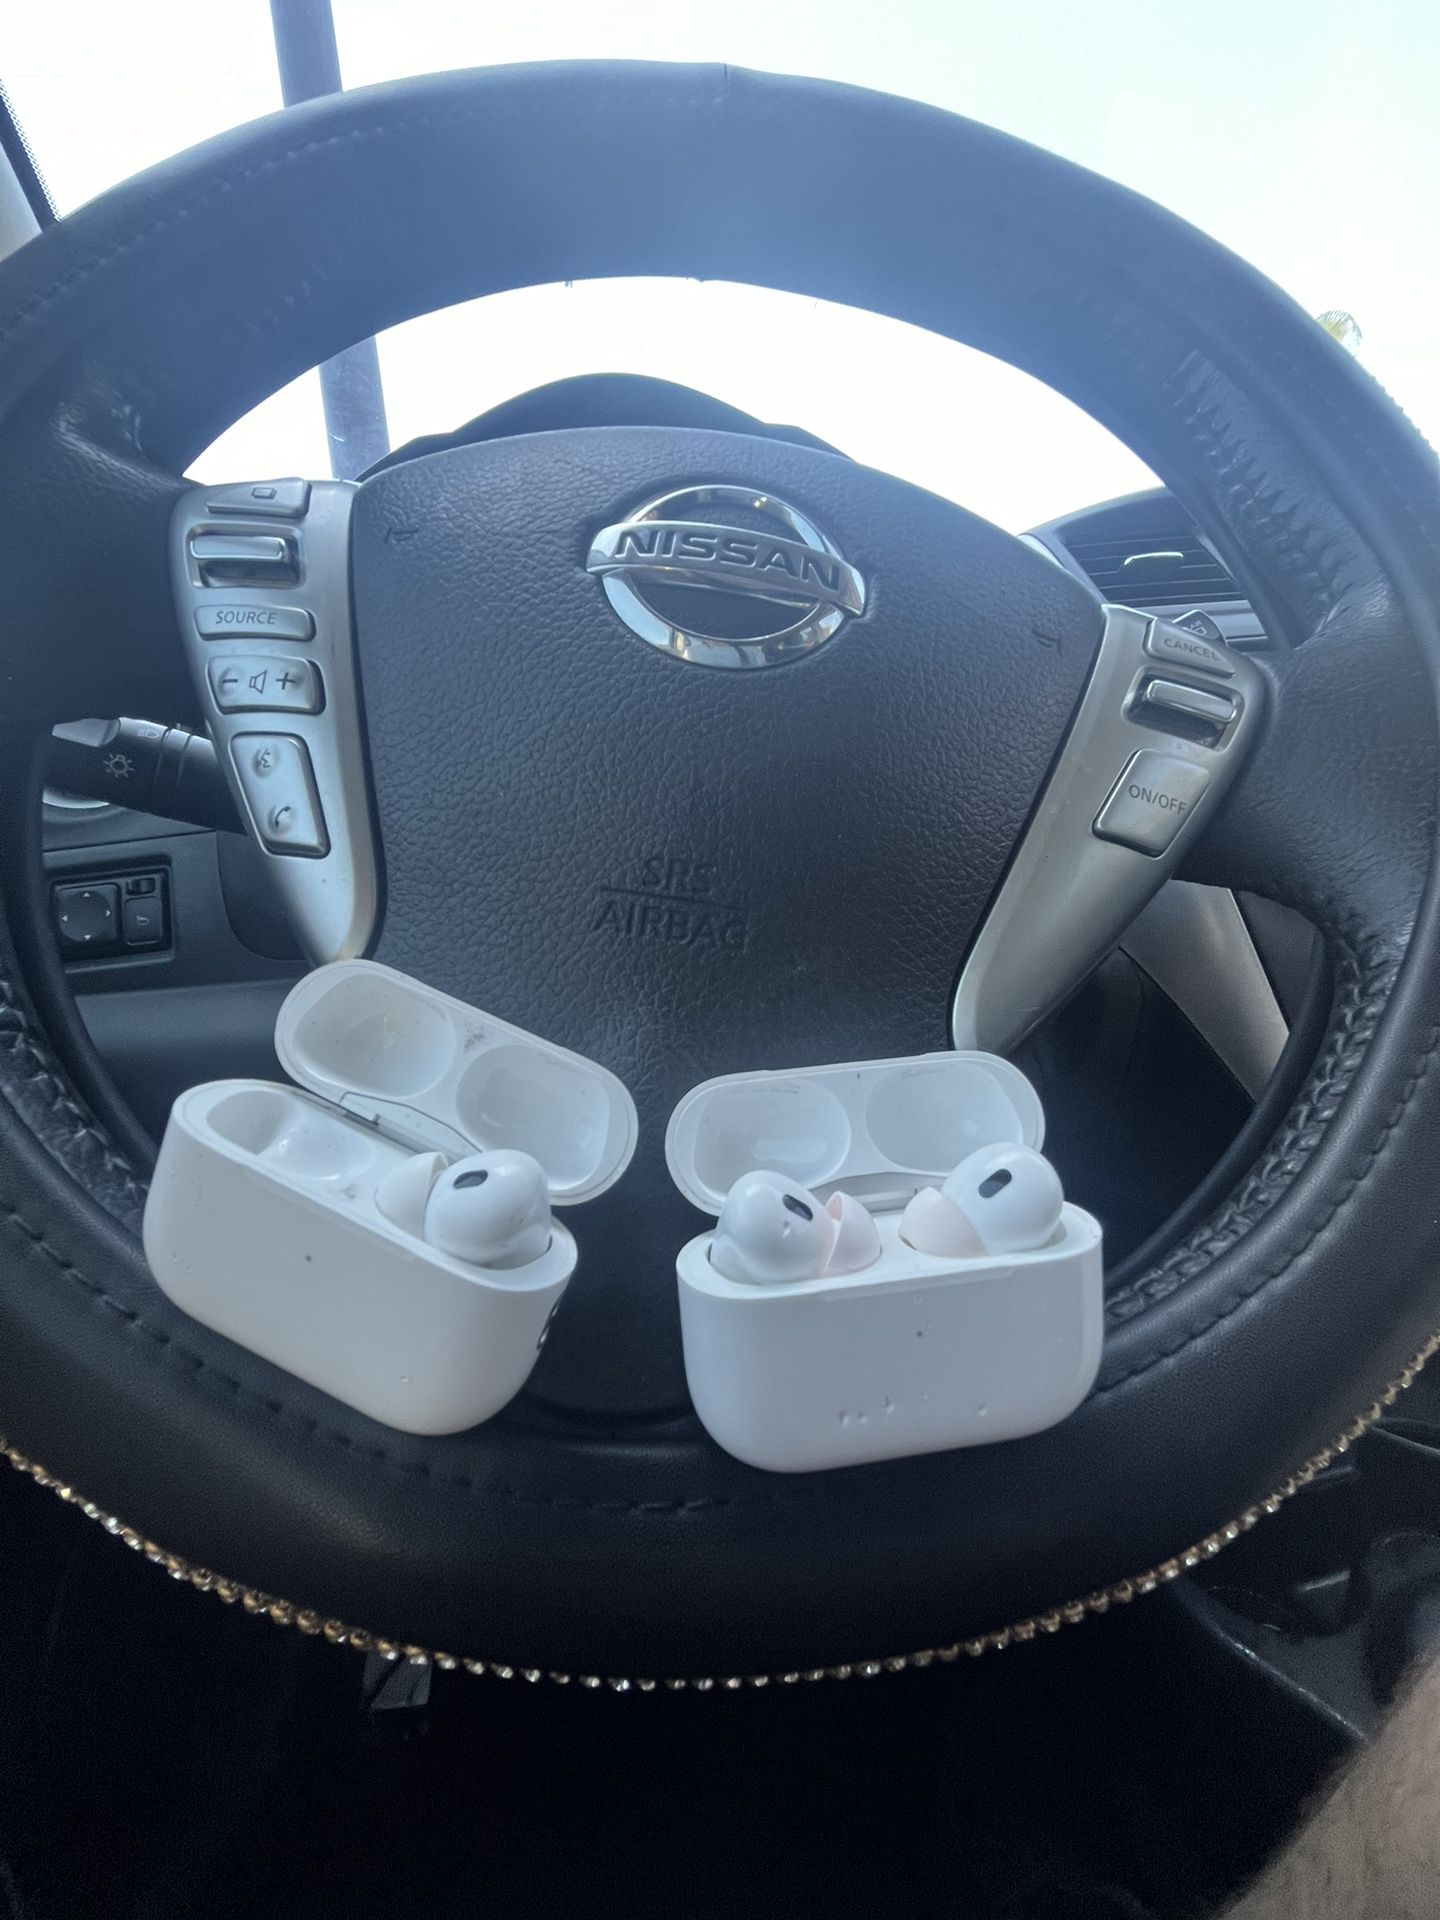 2 Pairs Of AirPod Pros Gen 2 One Pair Missing The Left AirPod